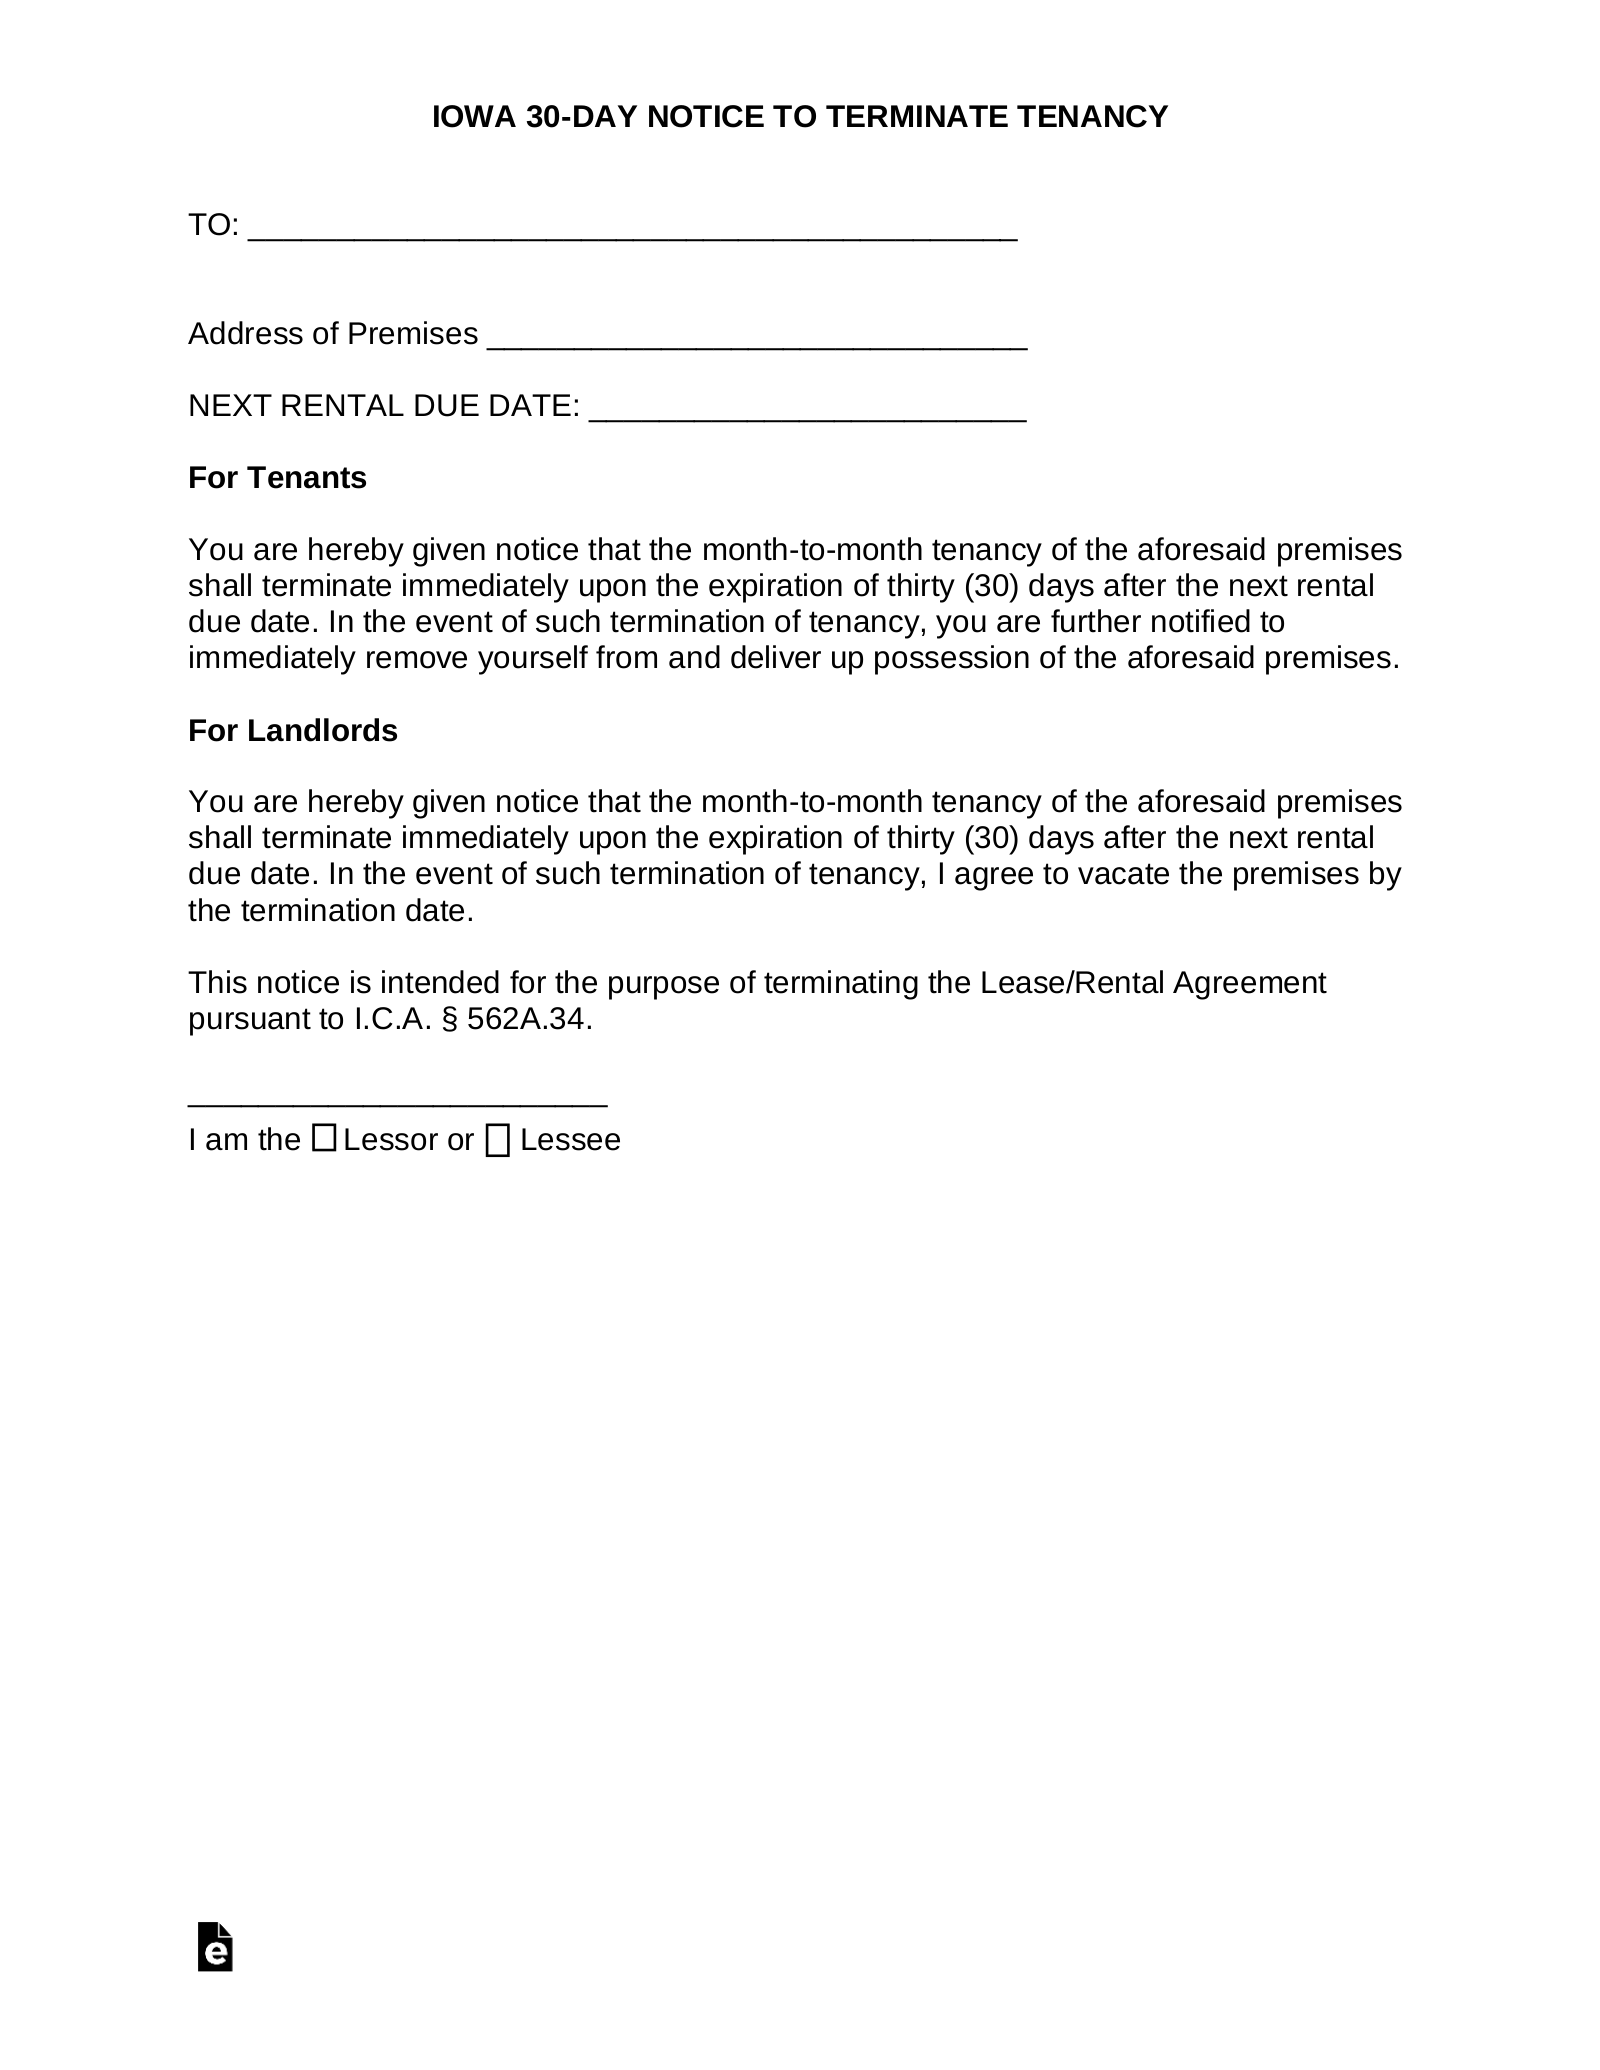 Commercial Lease Termination Letter from eforms.com